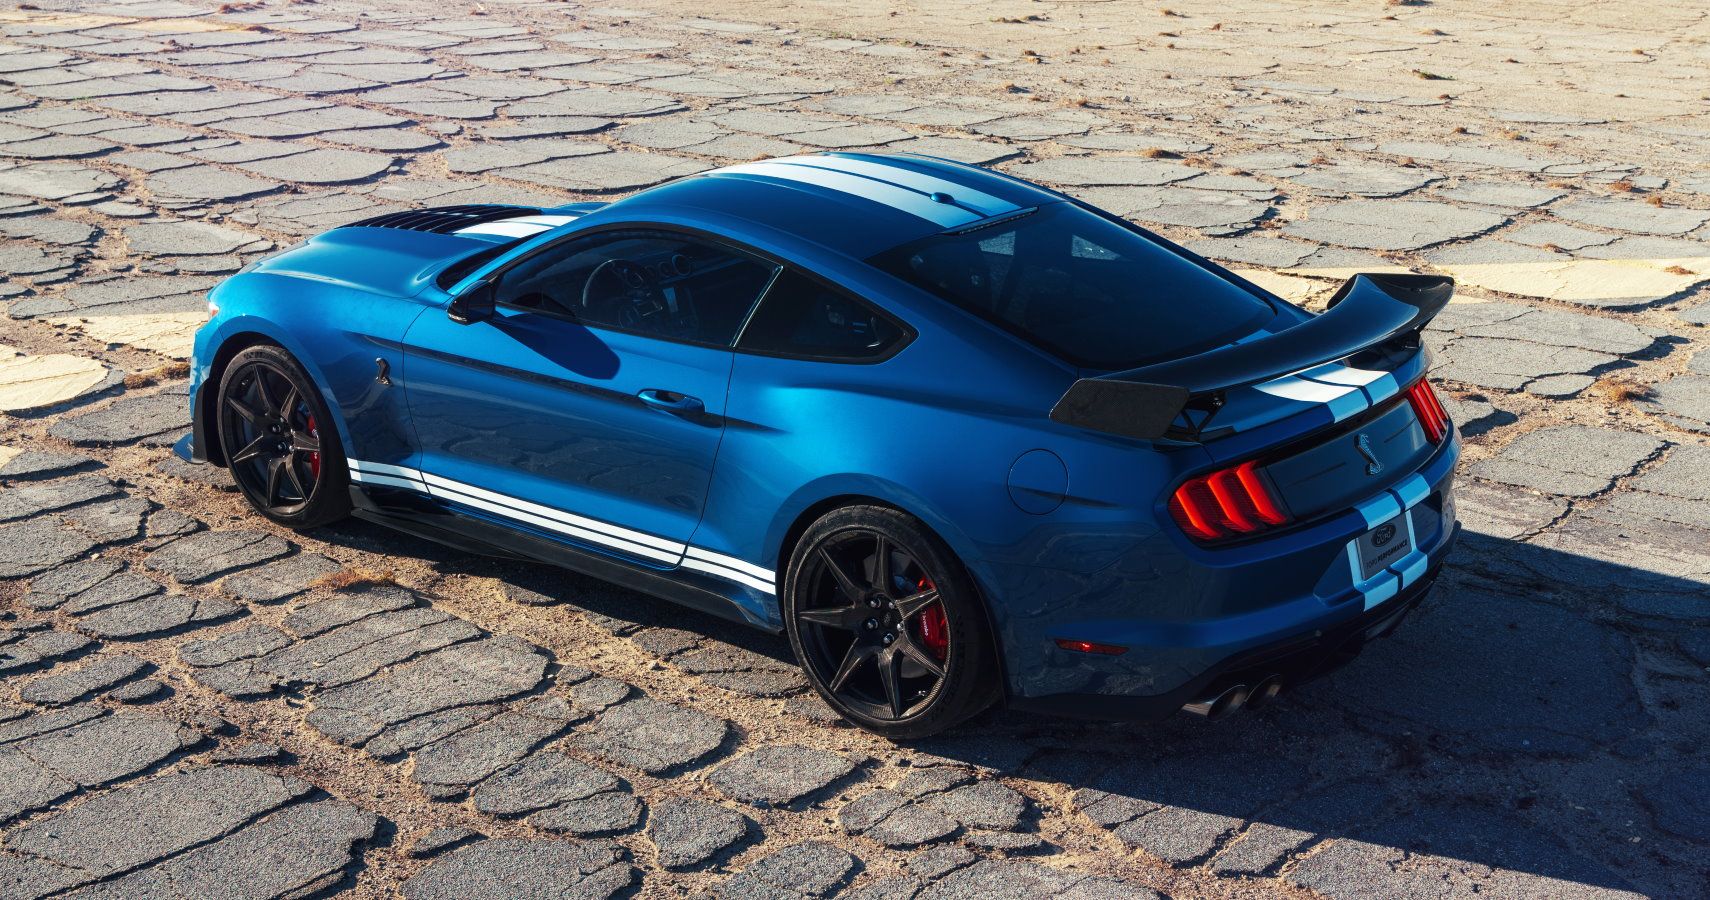 The all-new Shelby GT500???the pinnacle of any pony car ever engineered by Ford Performance???delivers on its heritage with more than 700 horsepower for the quickest street-legal acceleration and most high-performance technology to date ever offered in a Ford Mustang.